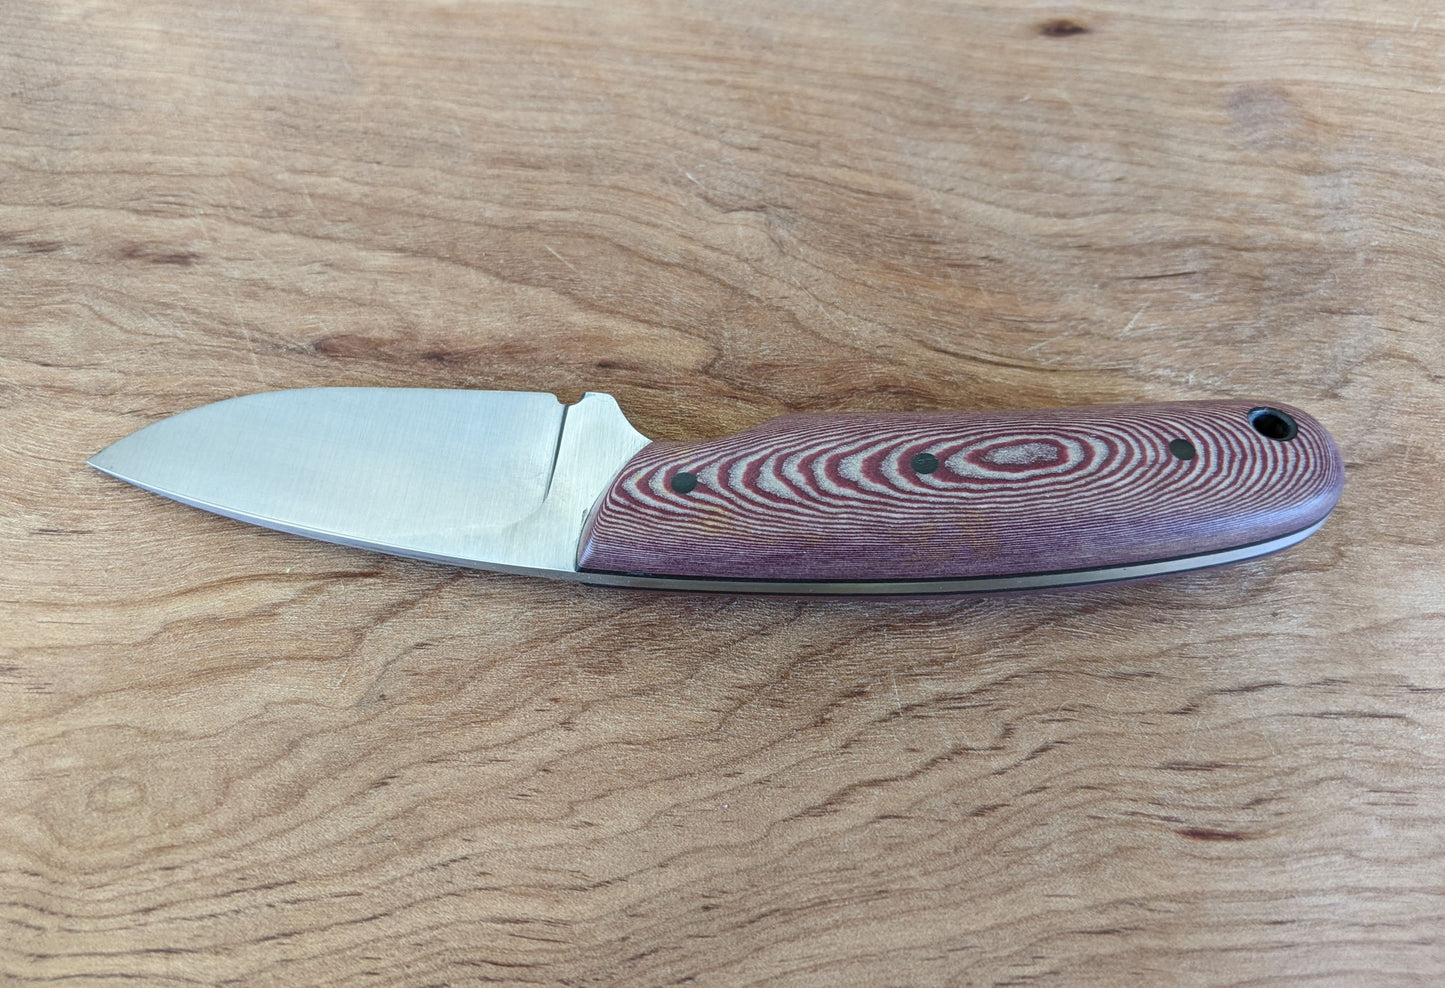 Work knife with Richlite handle